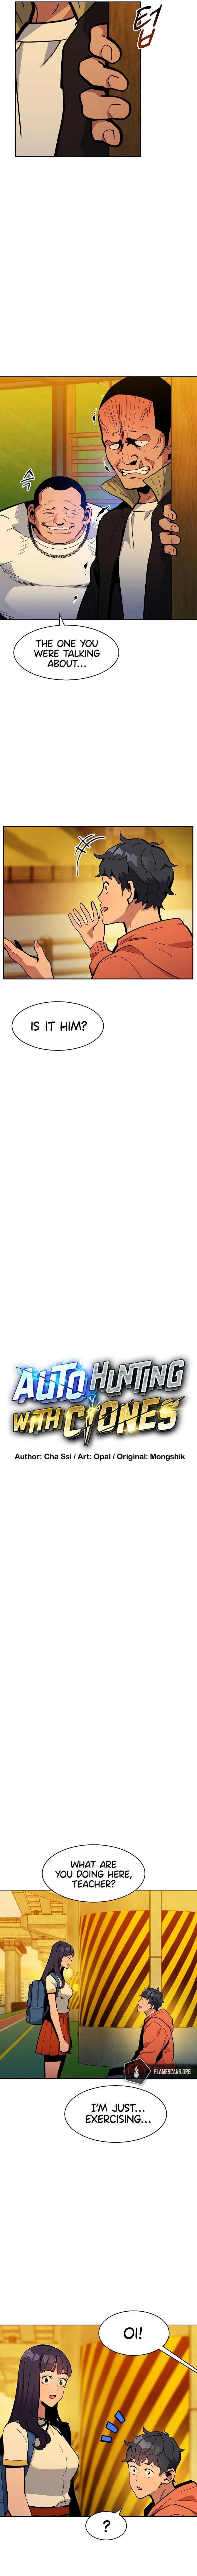 Auto-Hunting With Clones - Chapter 15 Page 6